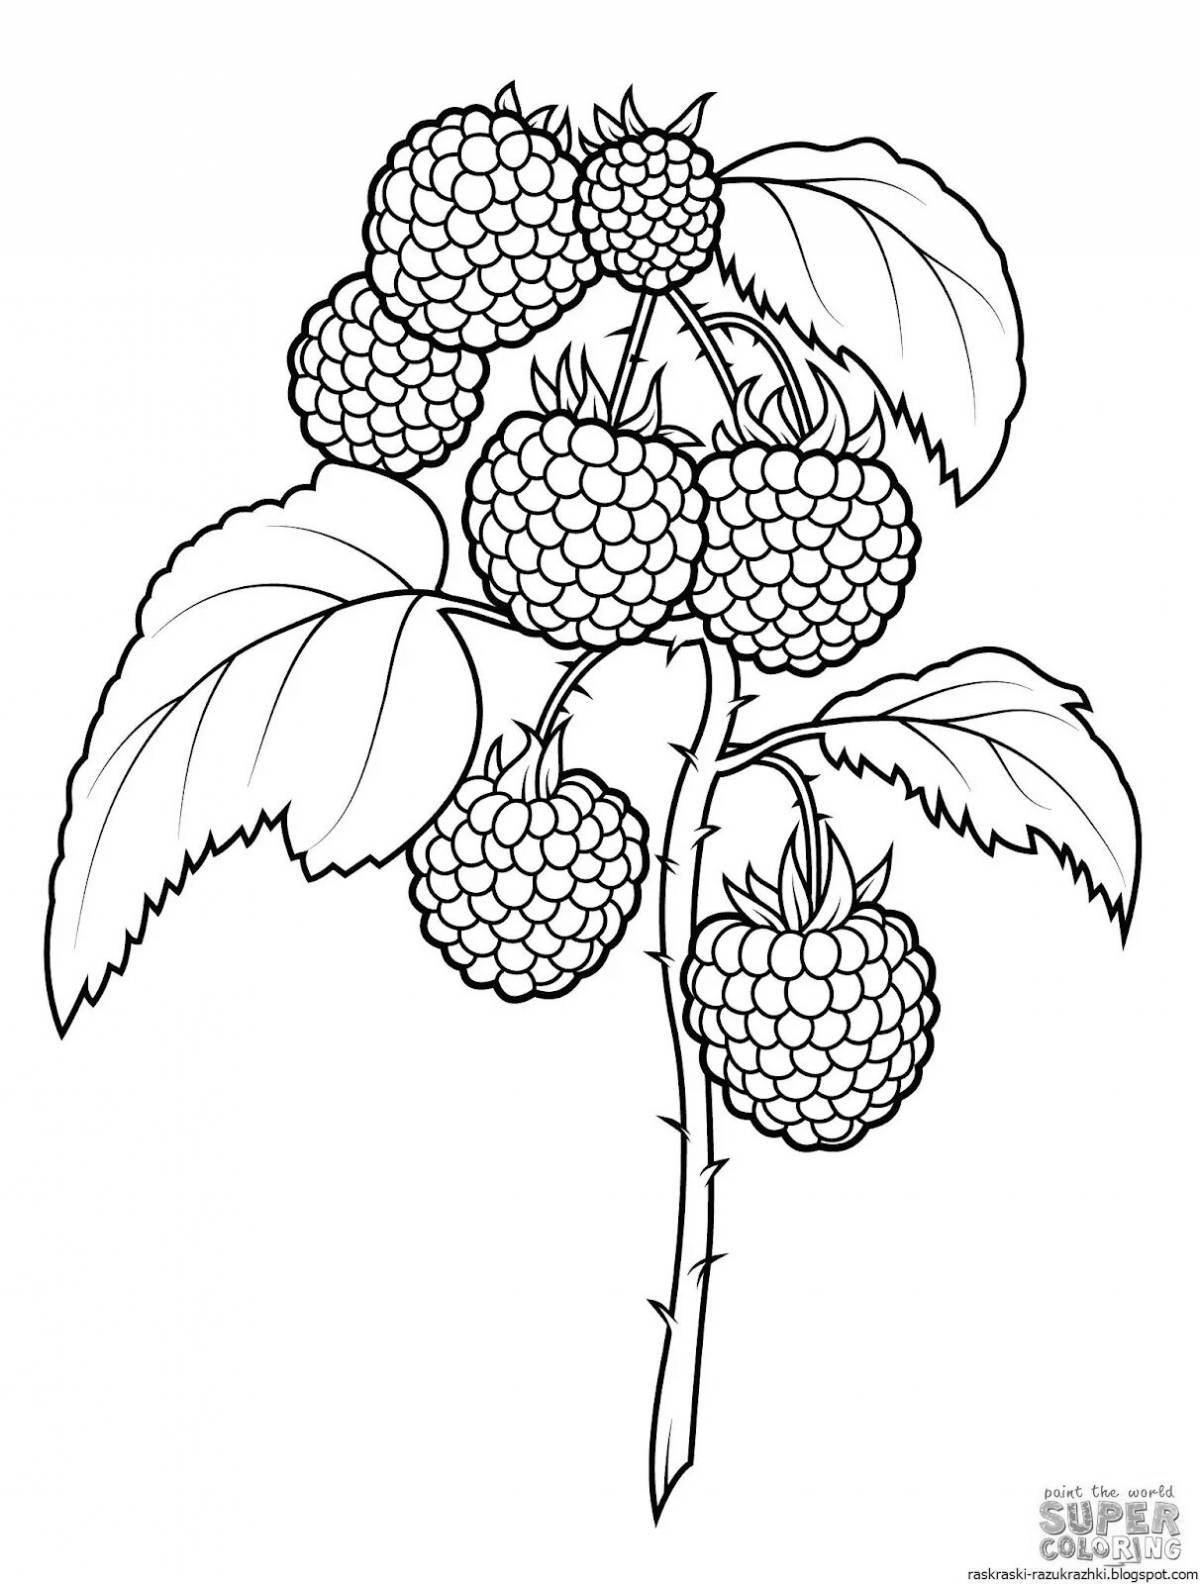 Coloring pages sweet berries for kids